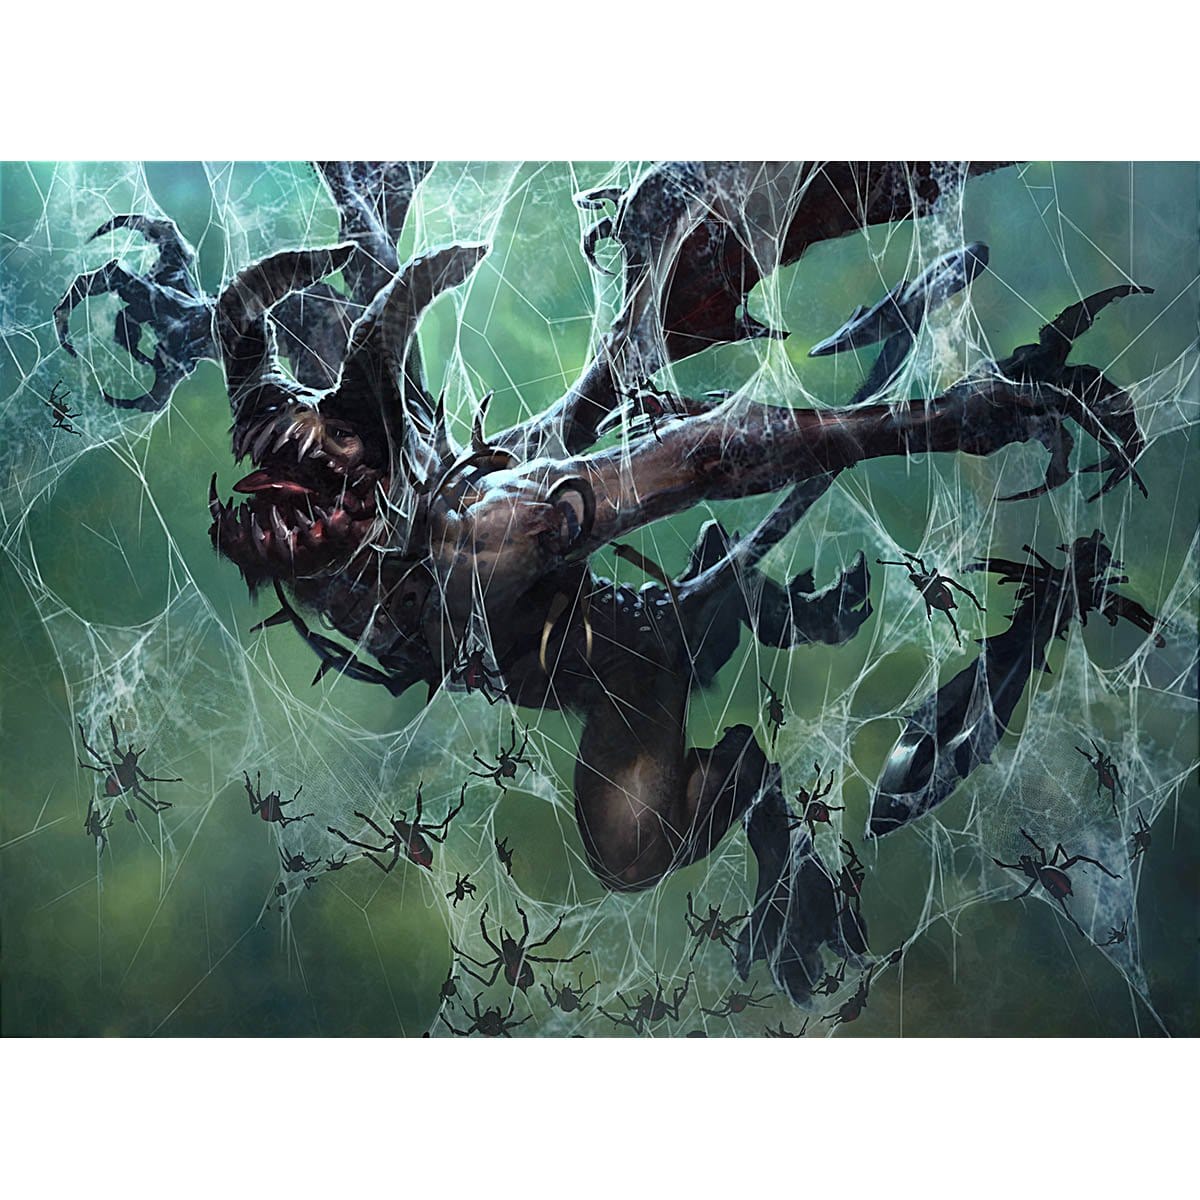 Eaten by Spiders Print - Print - Original Magic Art - Accessories for Magic the Gathering and other card games